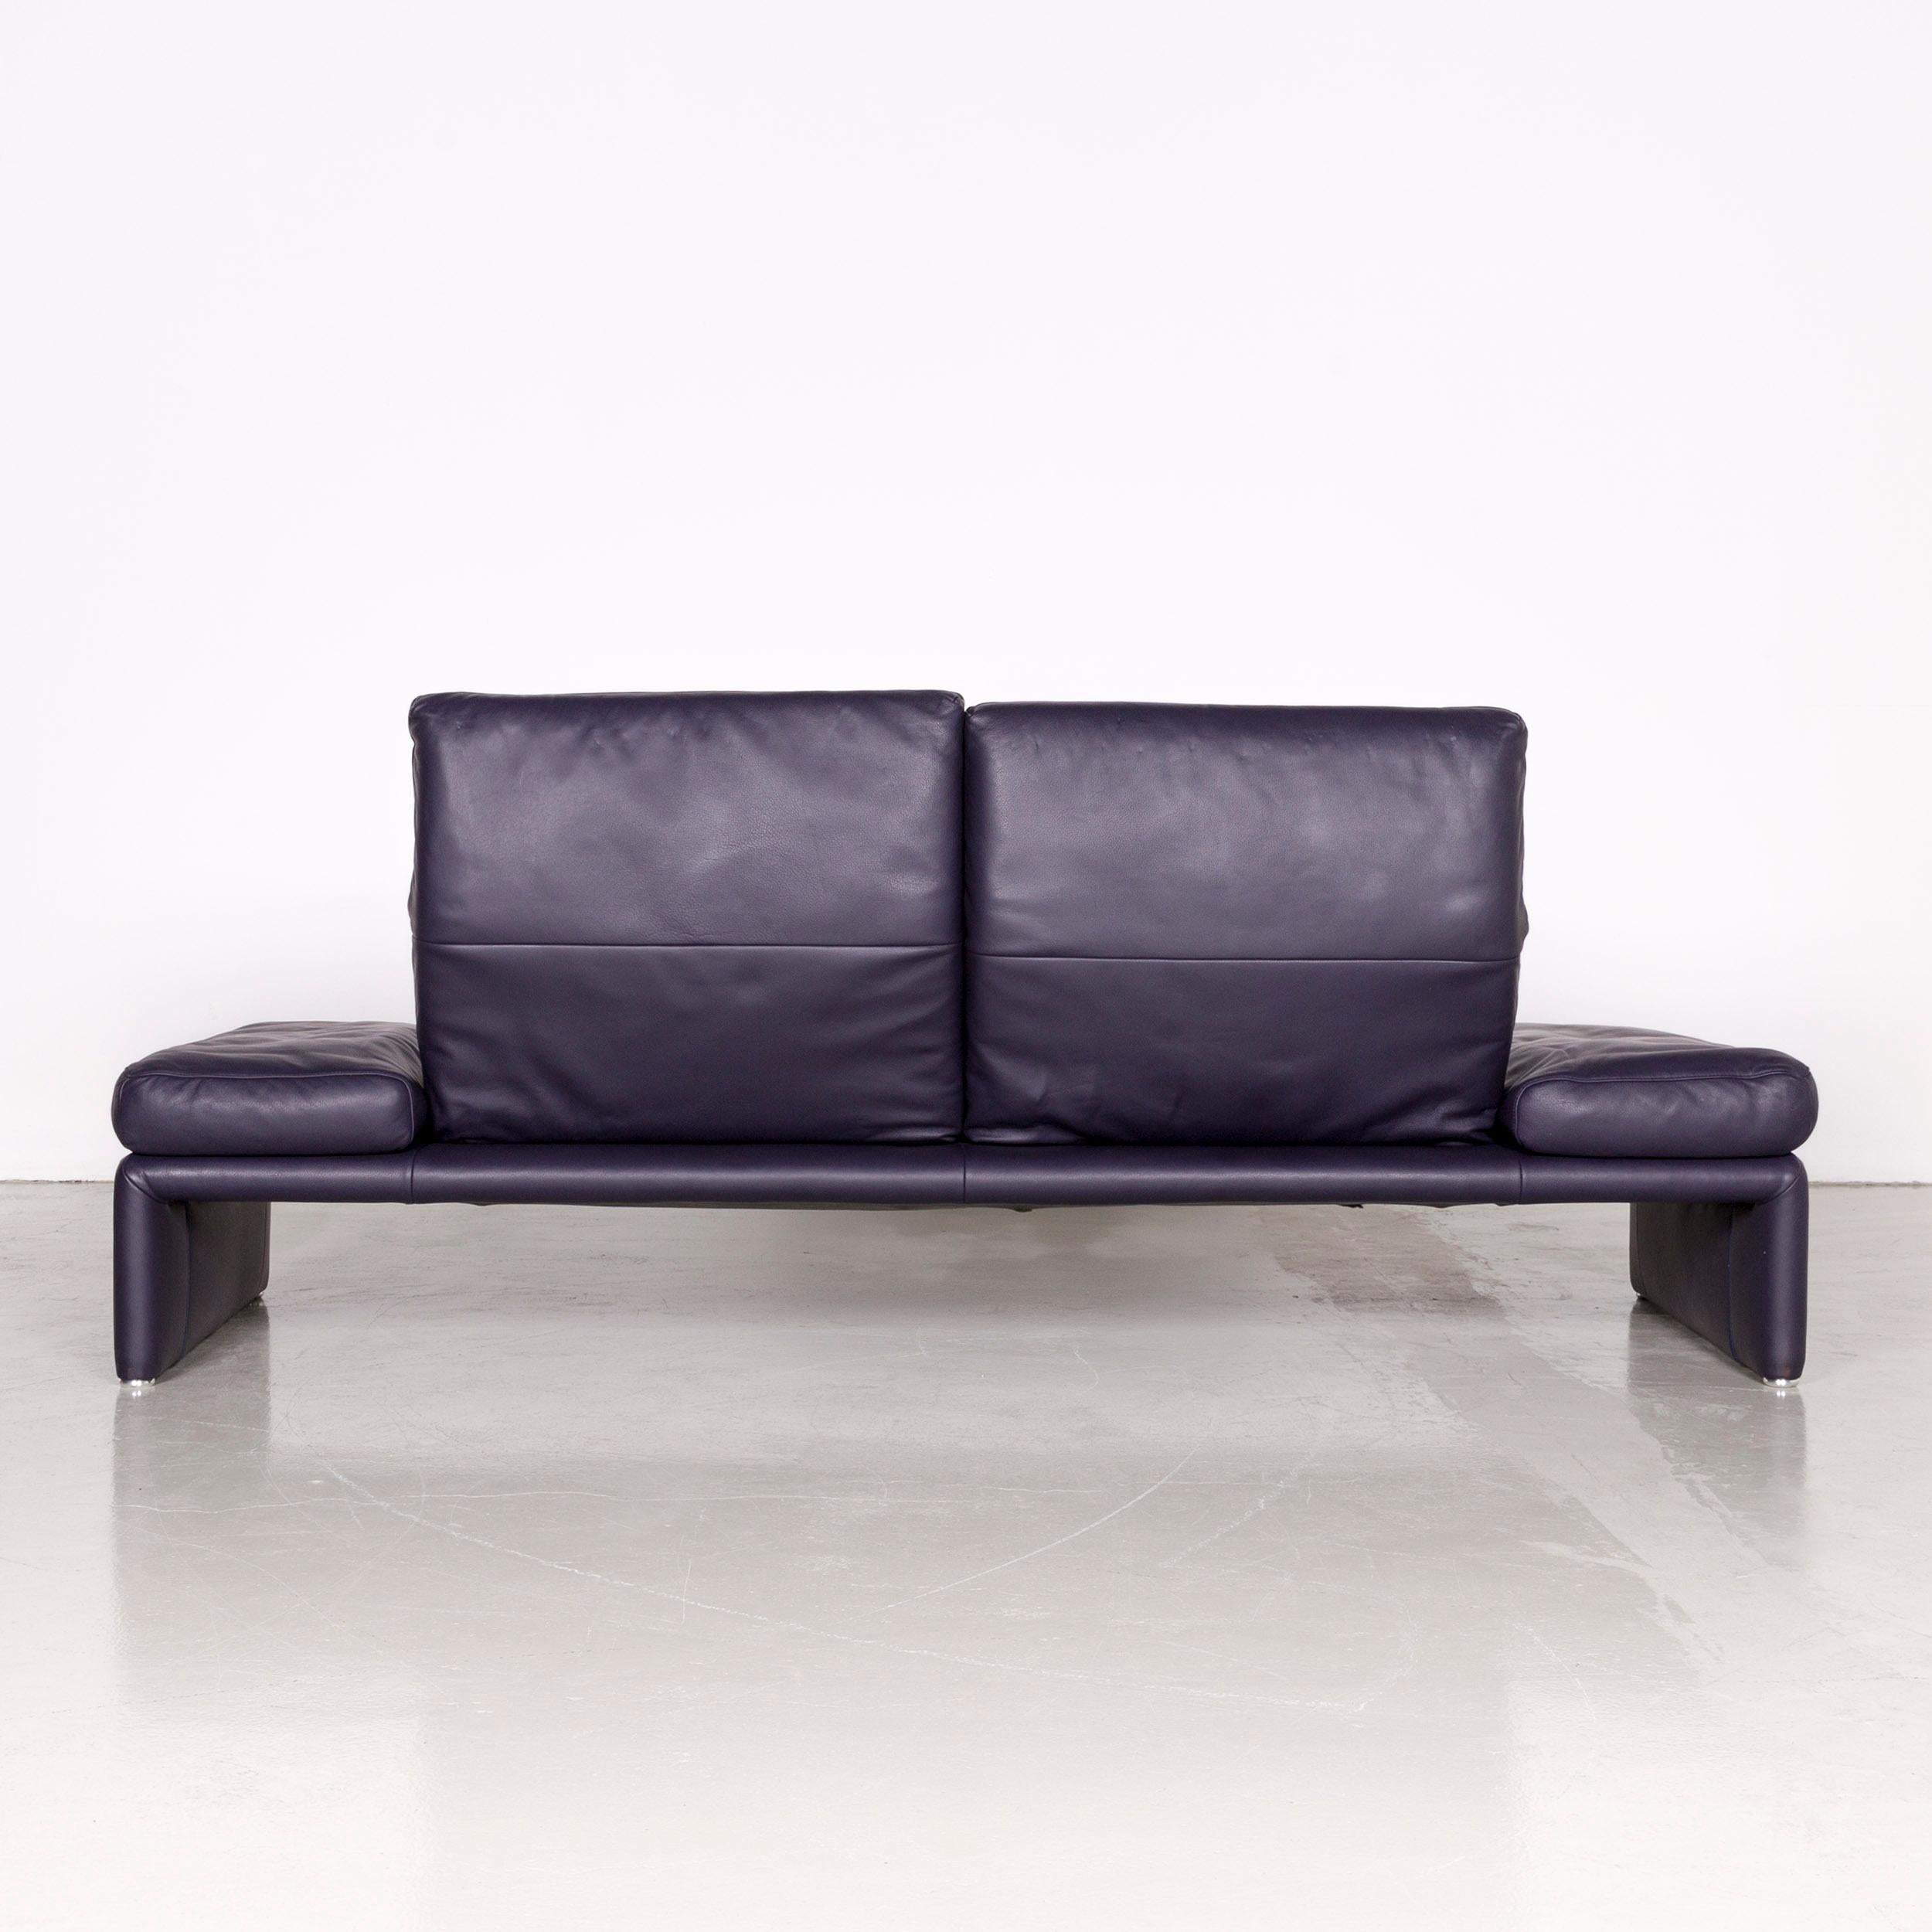 Koinor Raoul Designer Sofa Purple Leather Three-Seat Couch For Sale 2